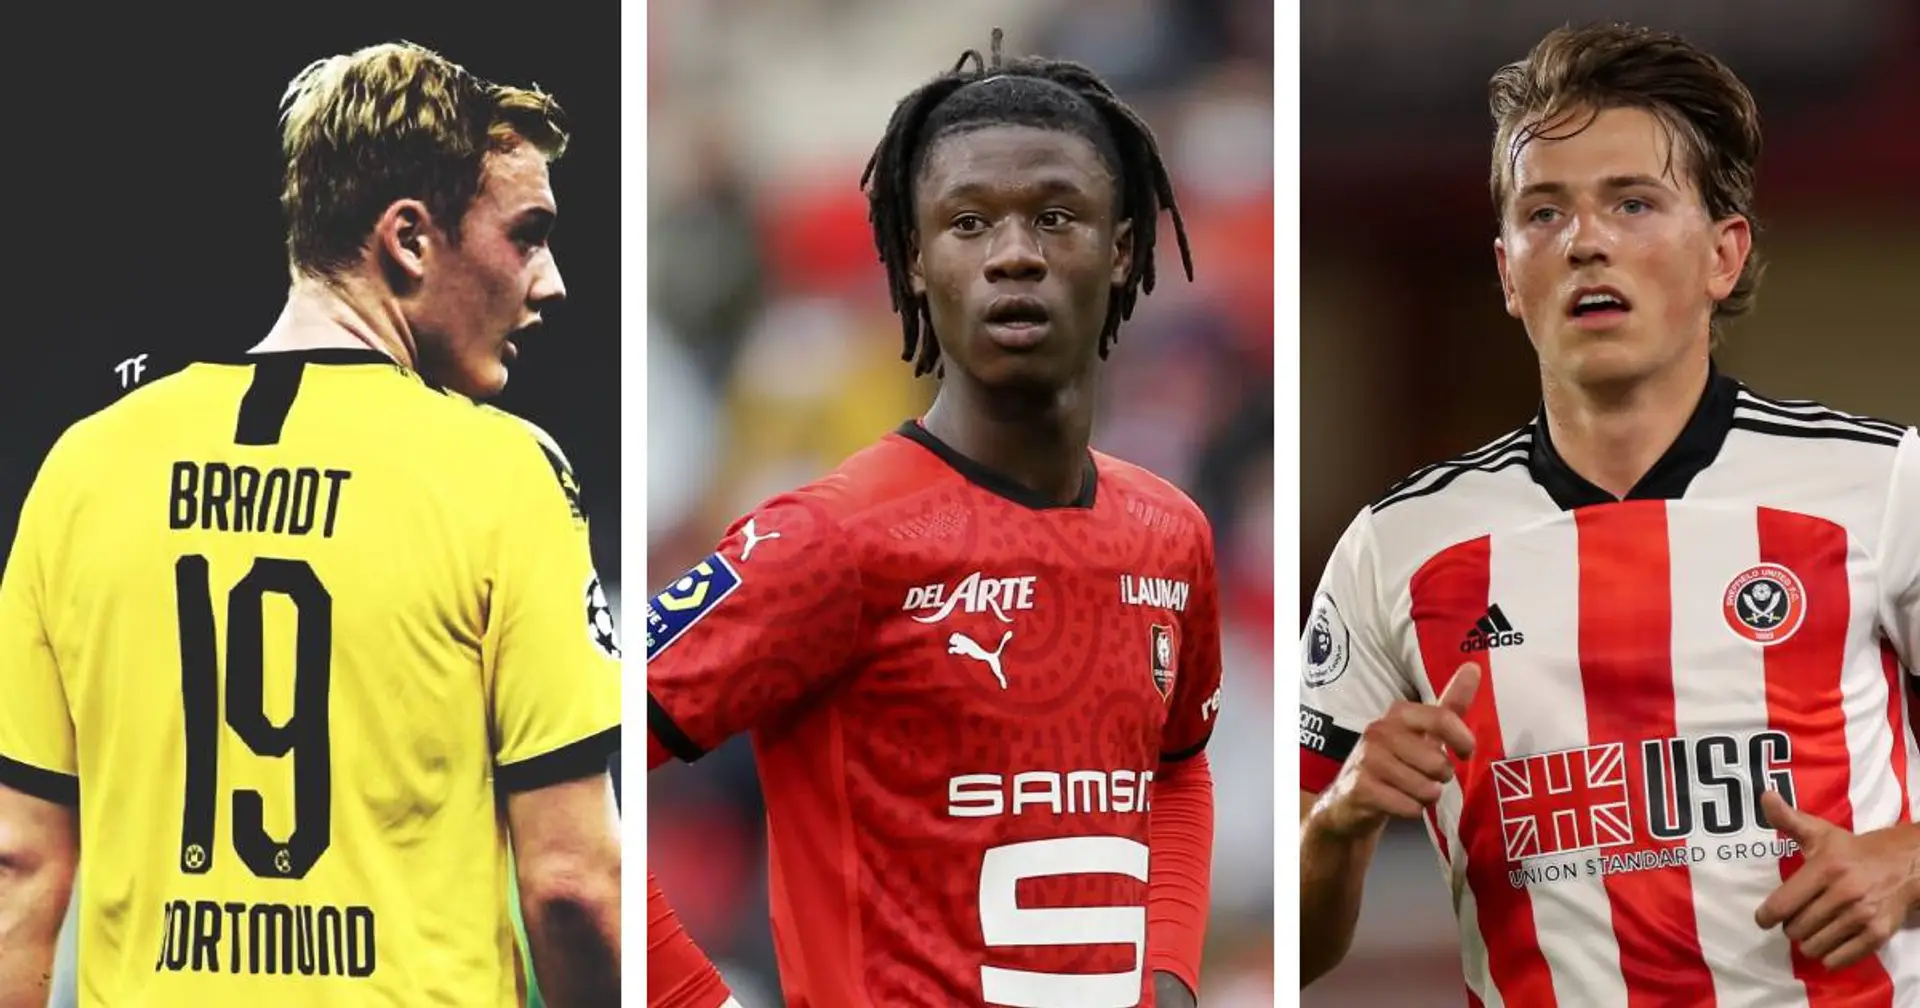 4 under-radar transfer stories Arsenal fans should know about